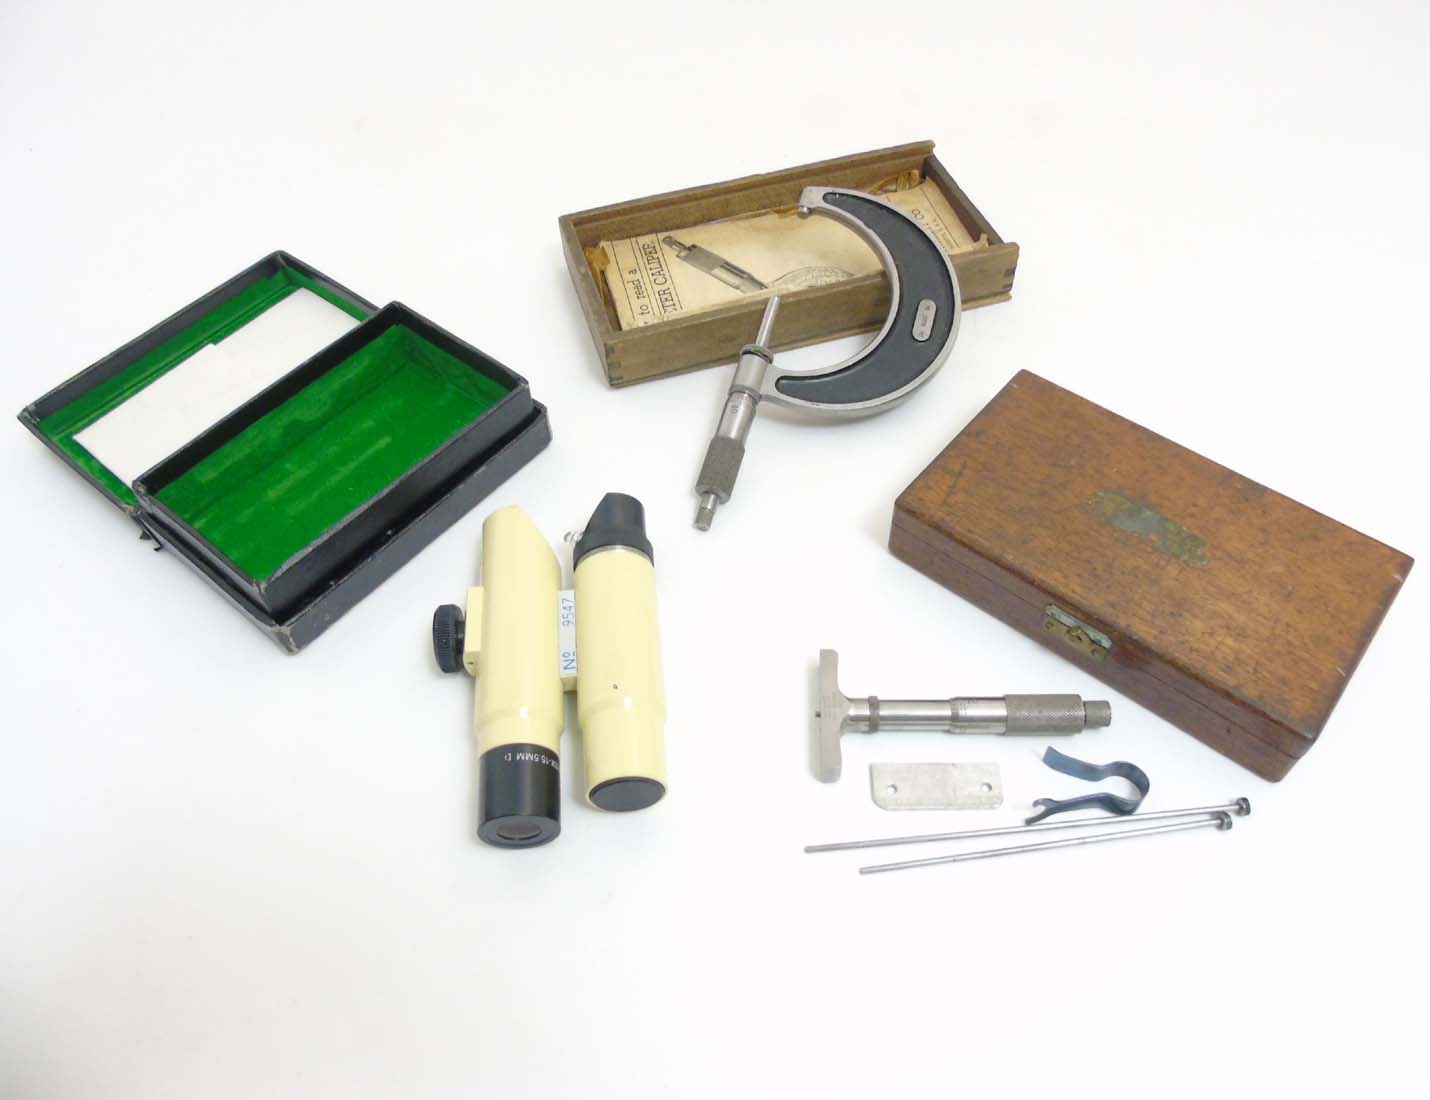 Draughtsman's tools : To include a crack detection microscope, a LS Starrett C.